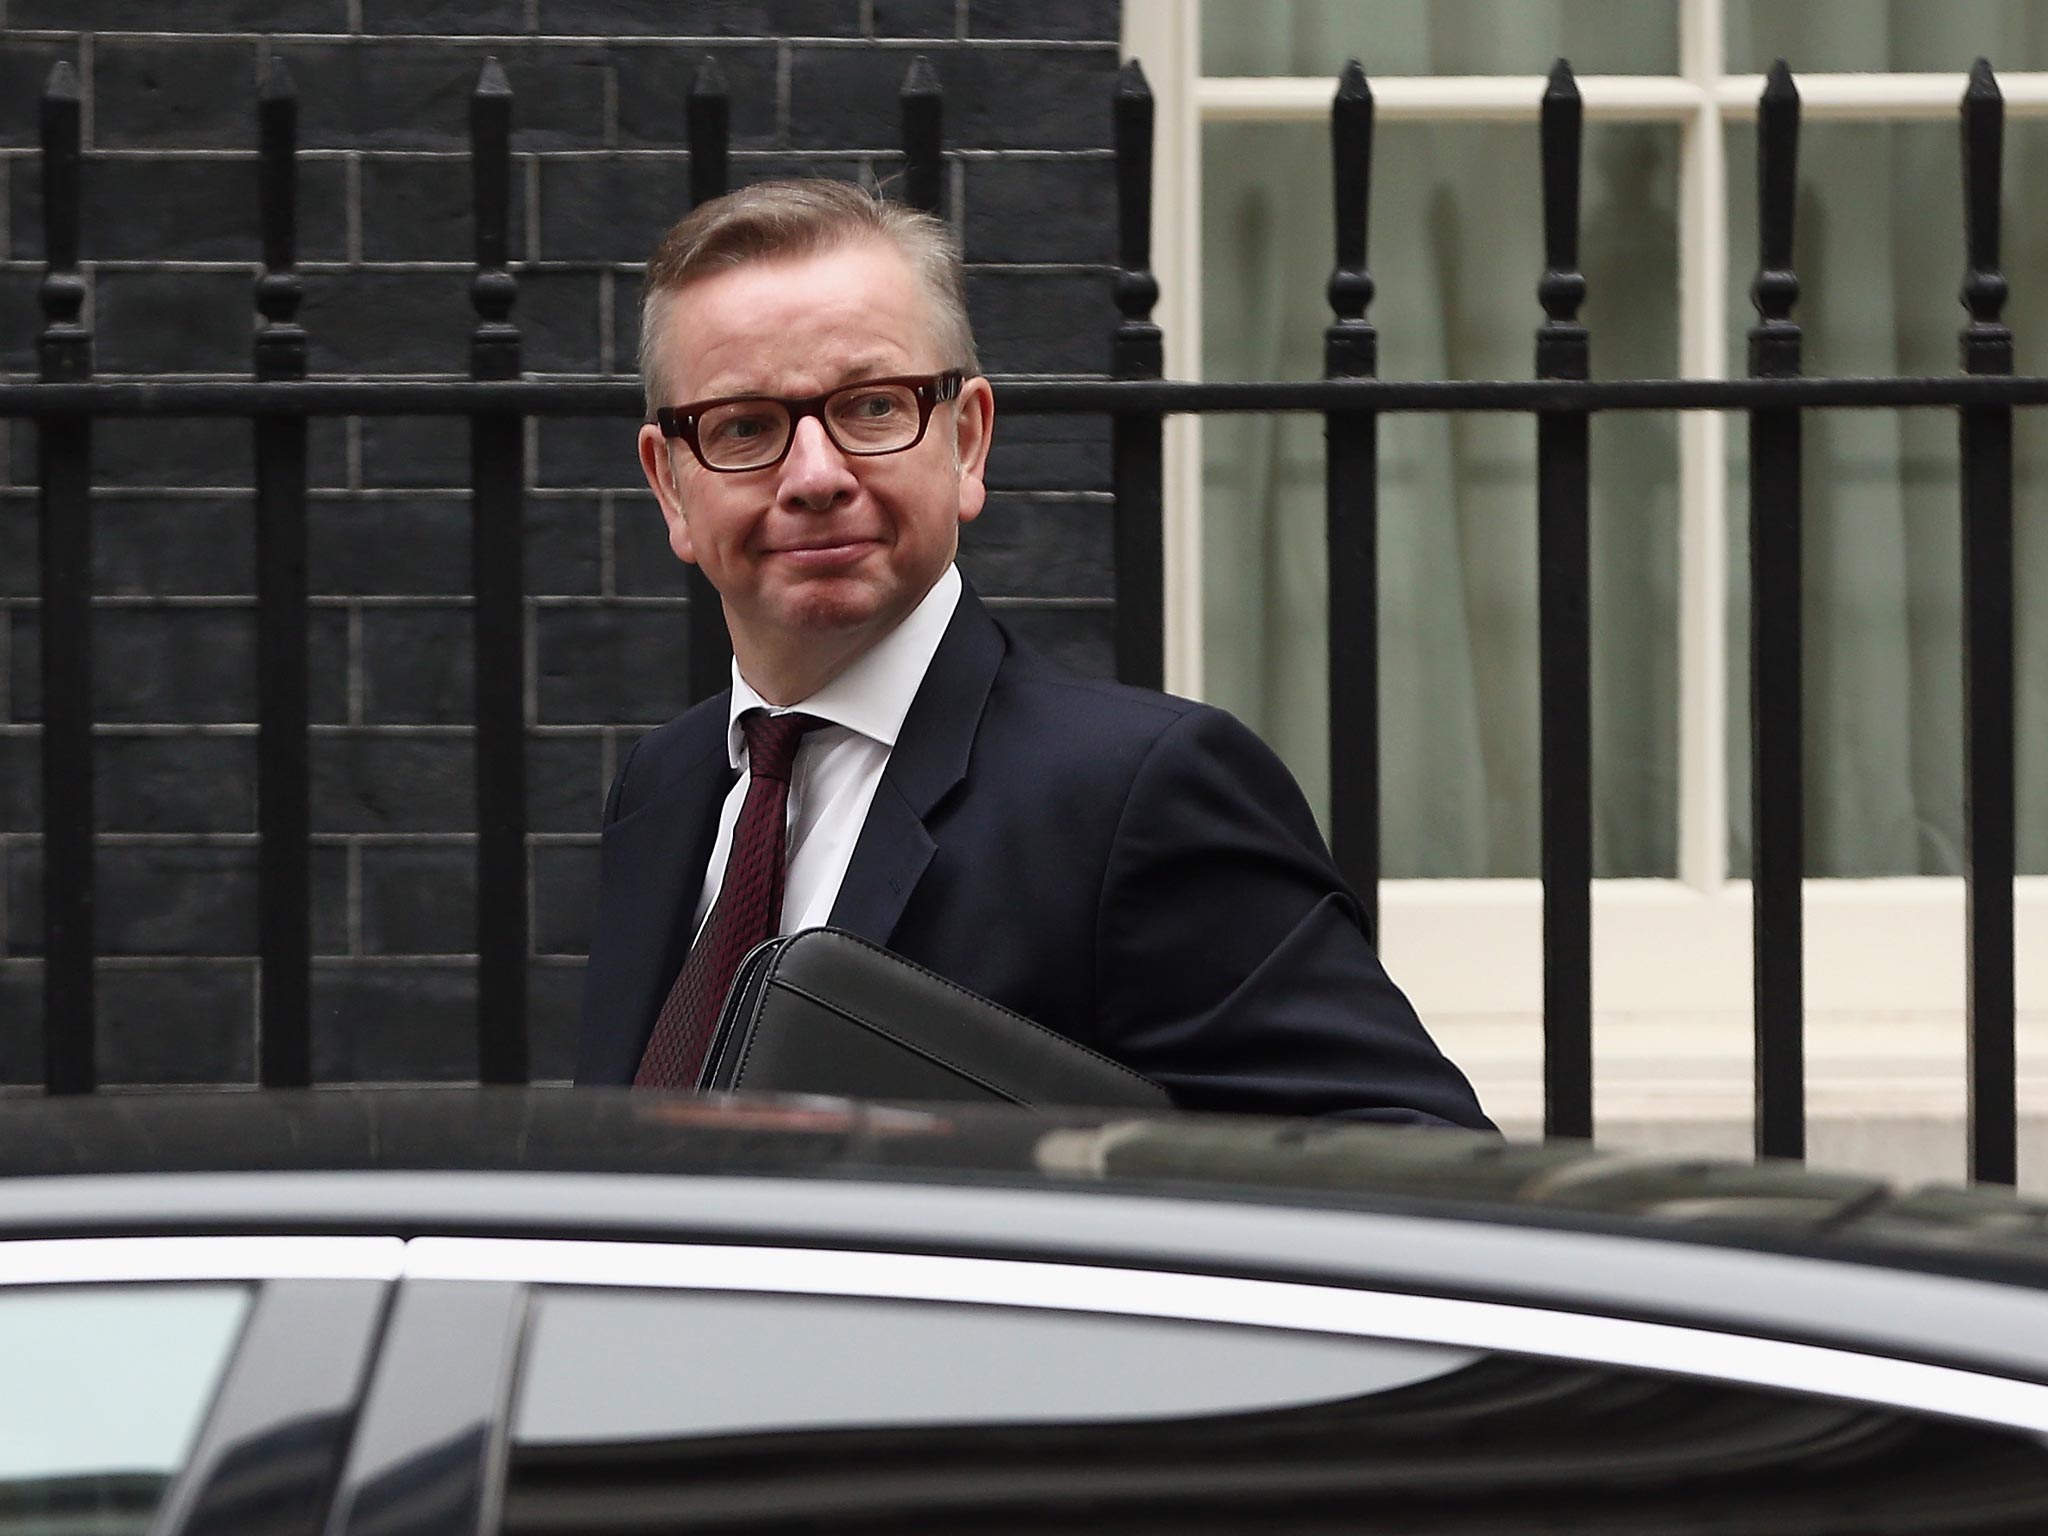 Michael Gove's former adviser has ratcheted up his attack on David Cameron